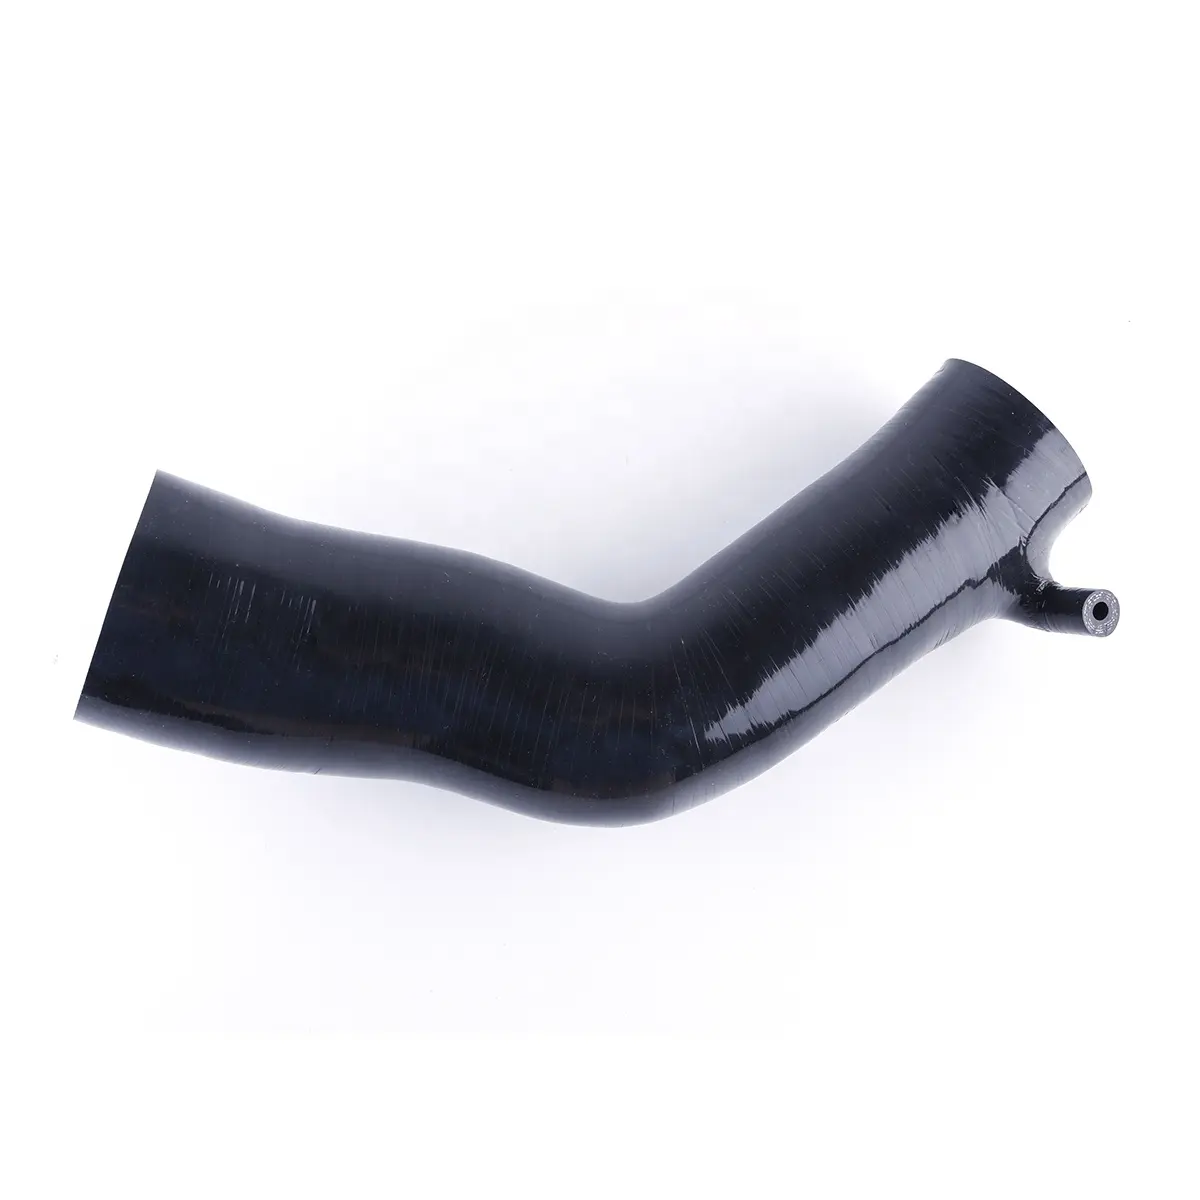 NEW ARRIVAL SILICONE INTAKE INLET HOSE FOR AUDI S4 - S5 3.0 TFSI V6 BLACK